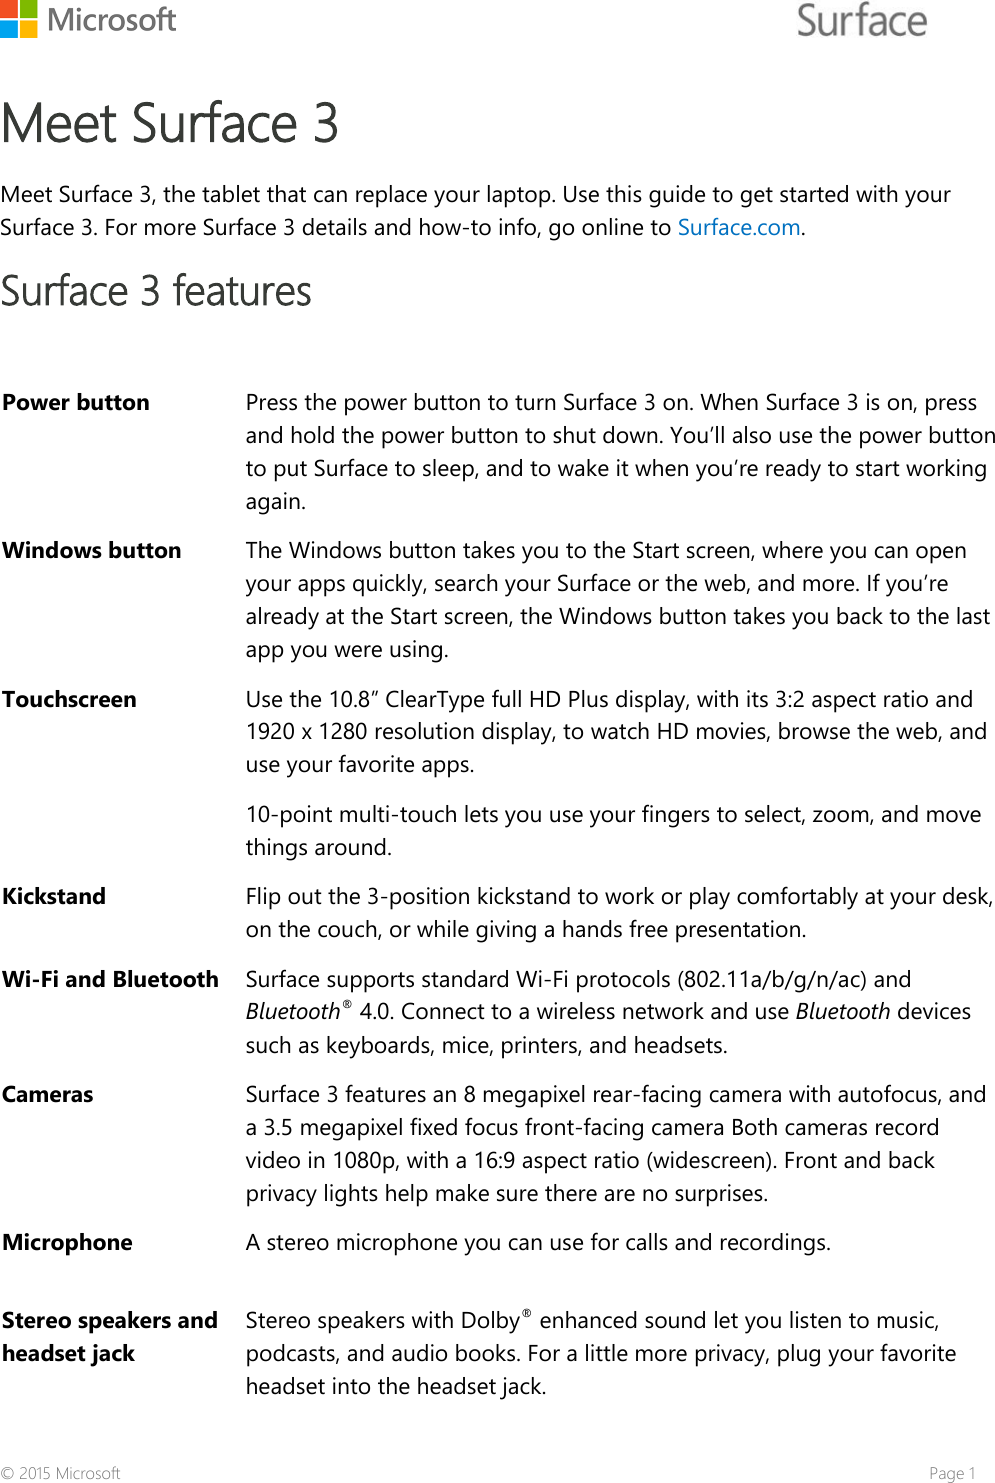    Meet Surface 3    Meet Surface 3, the tablet that can replace your laptop. Use this guide to get started with your Surface 3. For more Surface 3 details and how-to info, go online to Surface.com. Surface 3 features  Power button Press the power button to turn Surface 3 on. When Surface 3 is on, press and hold the power button to shut down. You’ll also use the power button to put Surface to sleep, and to wake it when you’re ready to start working again. Windows button The Windows button takes you to the Start screen, where you can open your apps quickly, search your Surface or the web, and more. If you’re already at the Start screen, the Windows button takes you back to the last app you were using. Touchscreen  Use the 10.8” ClearType full HD Plus display, with its 3:2 aspect ratio and 1920 x 1280 resolution display, to watch HD movies, browse the web, and use your favorite apps.  10-point multi-touch lets you use your fingers to select, zoom, and move things around.  Kickstand Flip out the 3-position kickstand to work or play comfortably at your desk, on the couch, or while giving a hands free presentation.  Wi-Fi and Bluetooth  Surface supports standard Wi-Fi protocols (802.11a/b/g/n/ac) and Bluetooth® 4.0. Connect to a wireless network and use Bluetooth devices such as keyboards, mice, printers, and headsets. Cameras Surface 3 features an 8 megapixel rear-facing camera with autofocus, and a 3.5 megapixel fixed focus front-facing camera Both cameras record video in 1080p, with a 16:9 aspect ratio (widescreen). Front and back privacy lights help make sure there are no surprises.  Microphone  A stereo microphone you can use for calls and recordings. Stereo speakers and headset jack Stereo speakers with Dolby® enhanced sound let you listen to music, podcasts, and audio books. For a little more privacy, plug your favorite headset into the headset jack. © 2015 Microsoft    Page 1 